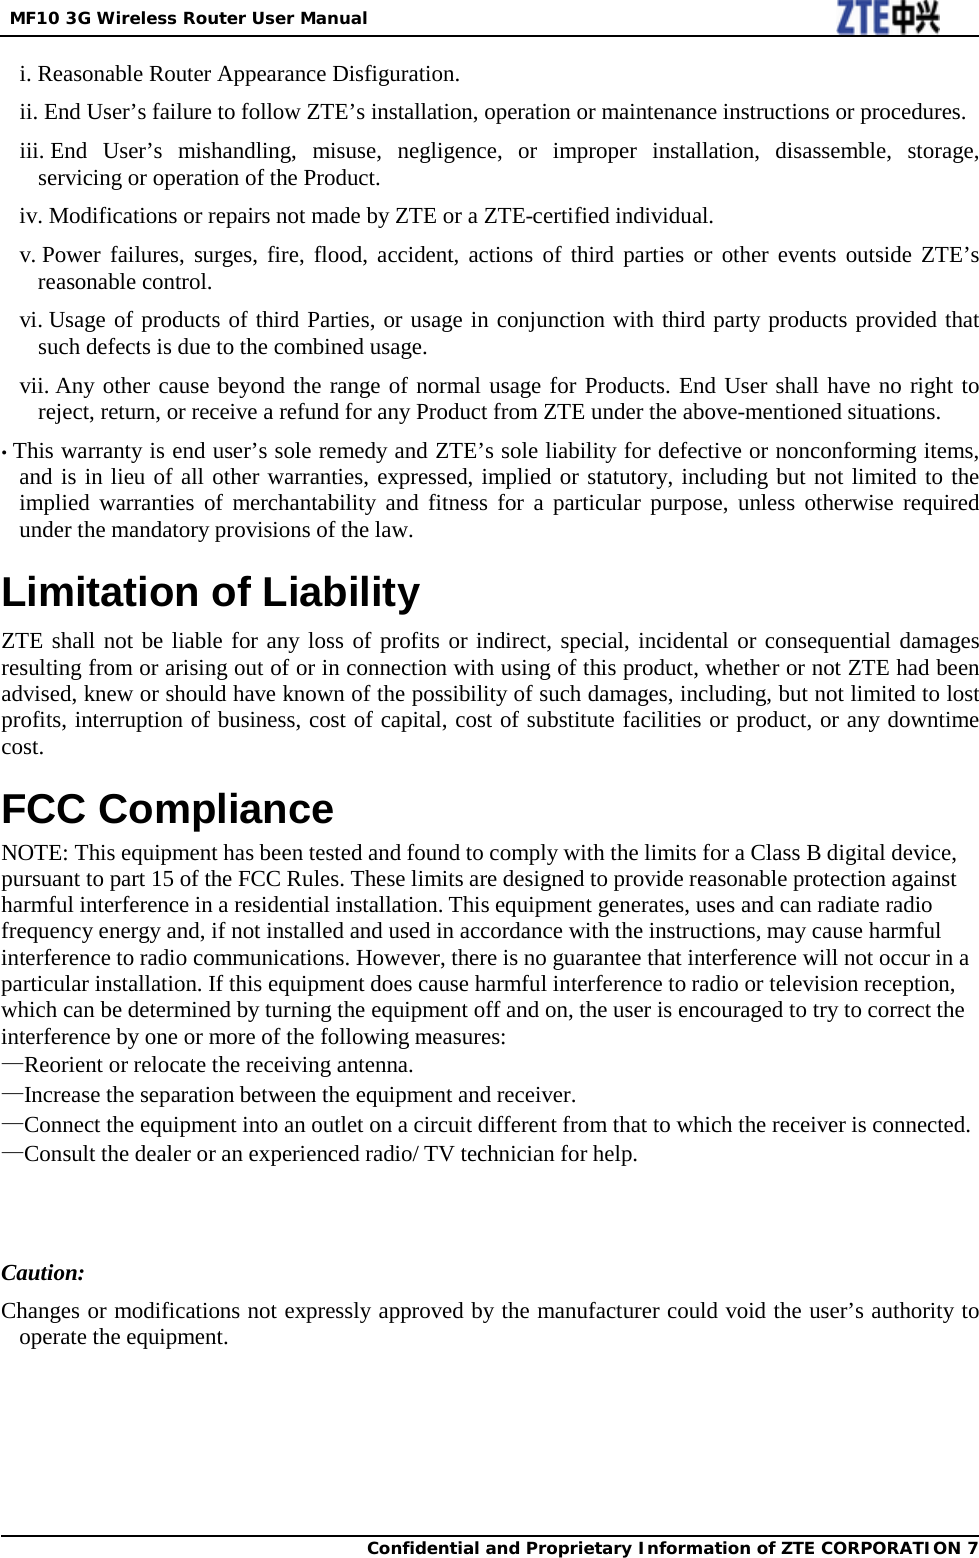  MF10 3G Wireless Router User Manual  Confidential and Proprietary Information of ZTE CORPORATION 7   i. Reasonable Router Appearance Disfiguration. ii. End User’s failure to follow ZTE’s installation, operation or maintenance instructions or procedures. iii. End User’s mishandling, misuse, negligence, or improper installation, disassemble, storage, servicing or operation of the Product. iv. Modifications or repairs not made by ZTE or a ZTE-certified individual. v. Power failures, surges, fire, flood, accident, actions of third parties or other events outside ZTE’s reasonable control. vi. Usage of products of third Parties, or usage in conjunction with third party products provided that such defects is due to the combined usage. vii. Any other cause beyond the range of normal usage for Products. End User shall have no right to reject, return, or receive a refund for any Product from ZTE under the above-mentioned situations.   • This warranty is end user’s sole remedy and ZTE’s sole liability for defective or nonconforming items, and is in lieu of all other warranties, expressed, implied or statutory, including but not limited to the implied warranties of merchantability and fitness for a particular purpose, unless otherwise required under the mandatory provisions of the law. Limitation of Liability ZTE shall not be liable for any loss of profits or indirect, special, incidental or consequential damages resulting from or arising out of or in connection with using of this product, whether or not ZTE had been advised, knew or should have known of the possibility of such damages, including, but not limited to lost profits, interruption of business, cost of capital, cost of substitute facilities or product, or any downtime cost. FCC Compliance NOTE: This equipment has been tested and found to comply with the limits for a Class B digital device, pursuant to part 15 of the FCC Rules. These limits are designed to provide reasonable protection against harmful interference in a residential installation. This equipment generates, uses and can radiate radio frequency energy and, if not installed and used in accordance with the instructions, may cause harmful interference to radio communications. However, there is no guarantee that interference will not occur in a particular installation. If this equipment does cause harmful interference to radio or television reception, which can be determined by turning the equipment off and on, the user is encouraged to try to correct the interference by one or more of the following measures: —Reorient or relocate the receiving antenna. —Increase the separation between the equipment and receiver. —Connect the equipment into an outlet on a circuit different from that to which the receiver is connected. —Consult the dealer or an experienced radio/ TV technician for help.   Caution:   Changes or modifications not expressly approved by the manufacturer could void the user’s authority to operate the equipment. 